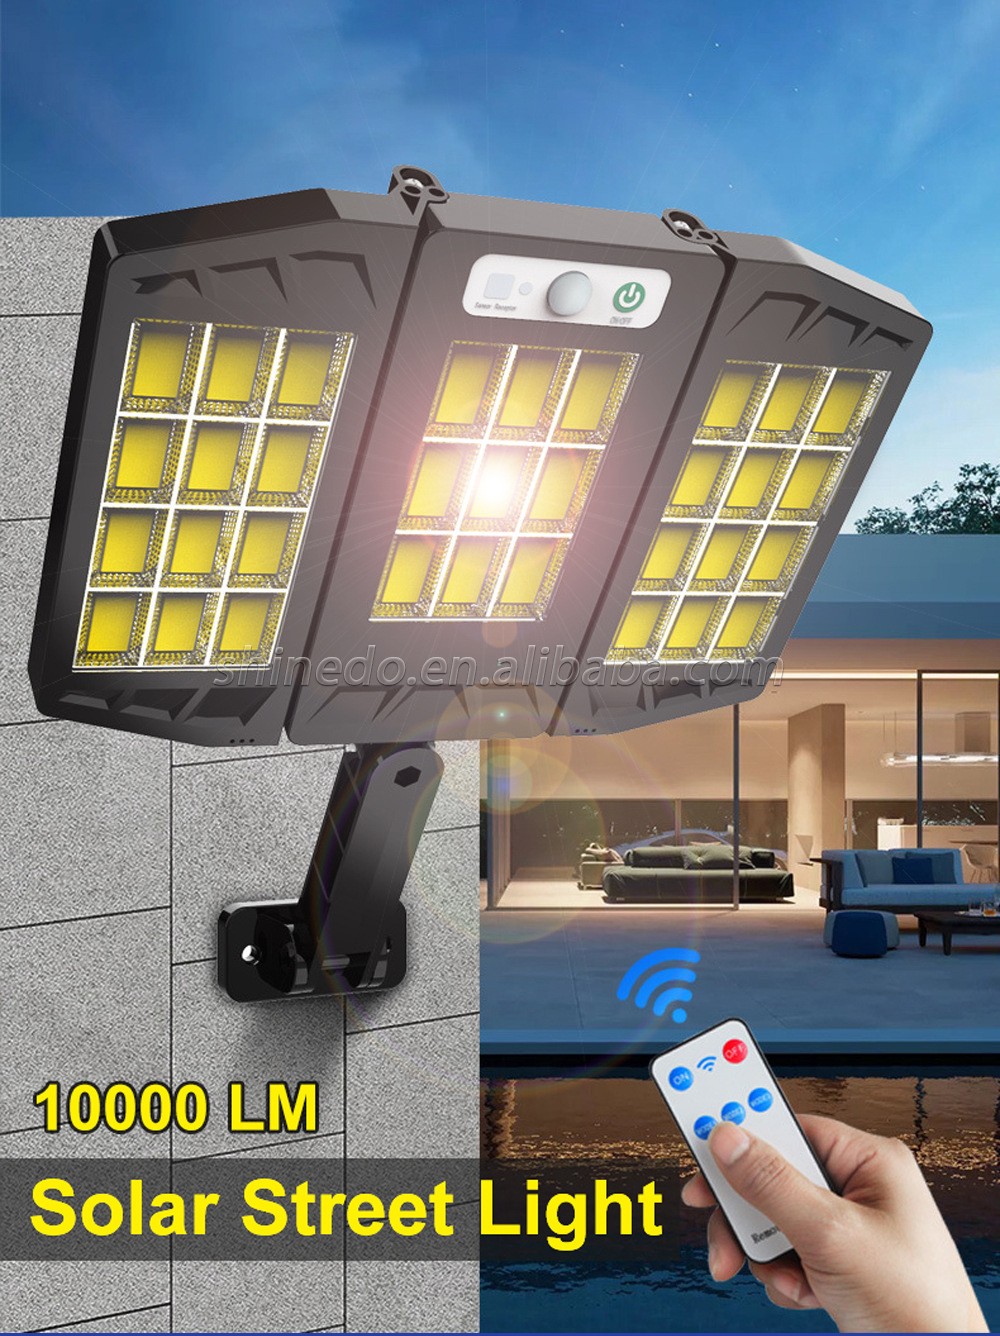 New products Solar Street Light Outdoor Wall Lamp Waterproof LED With 3 Modes Motion Sensor Lights